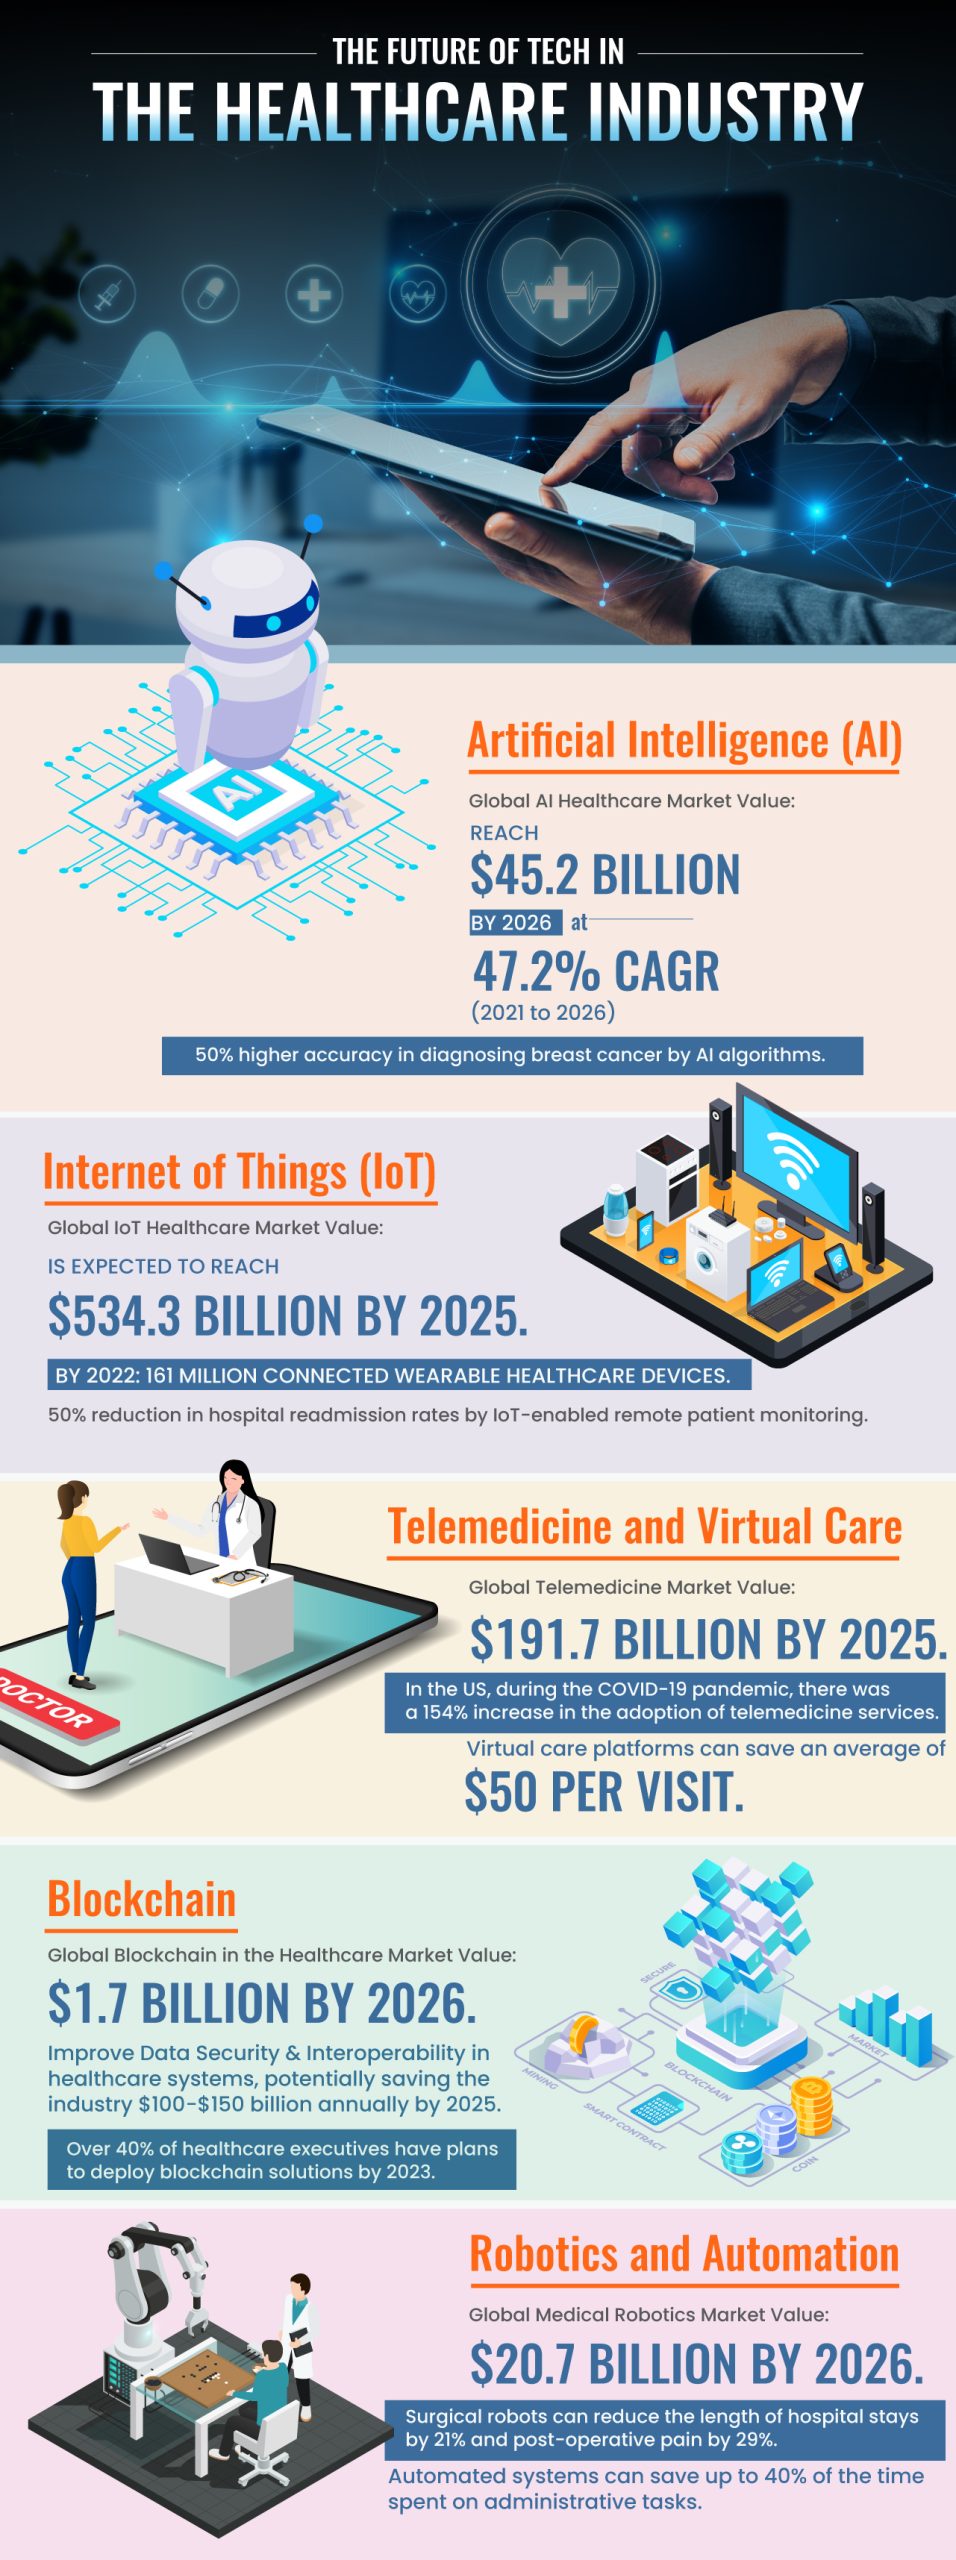 The Future of Tech in the Healthcare Industry